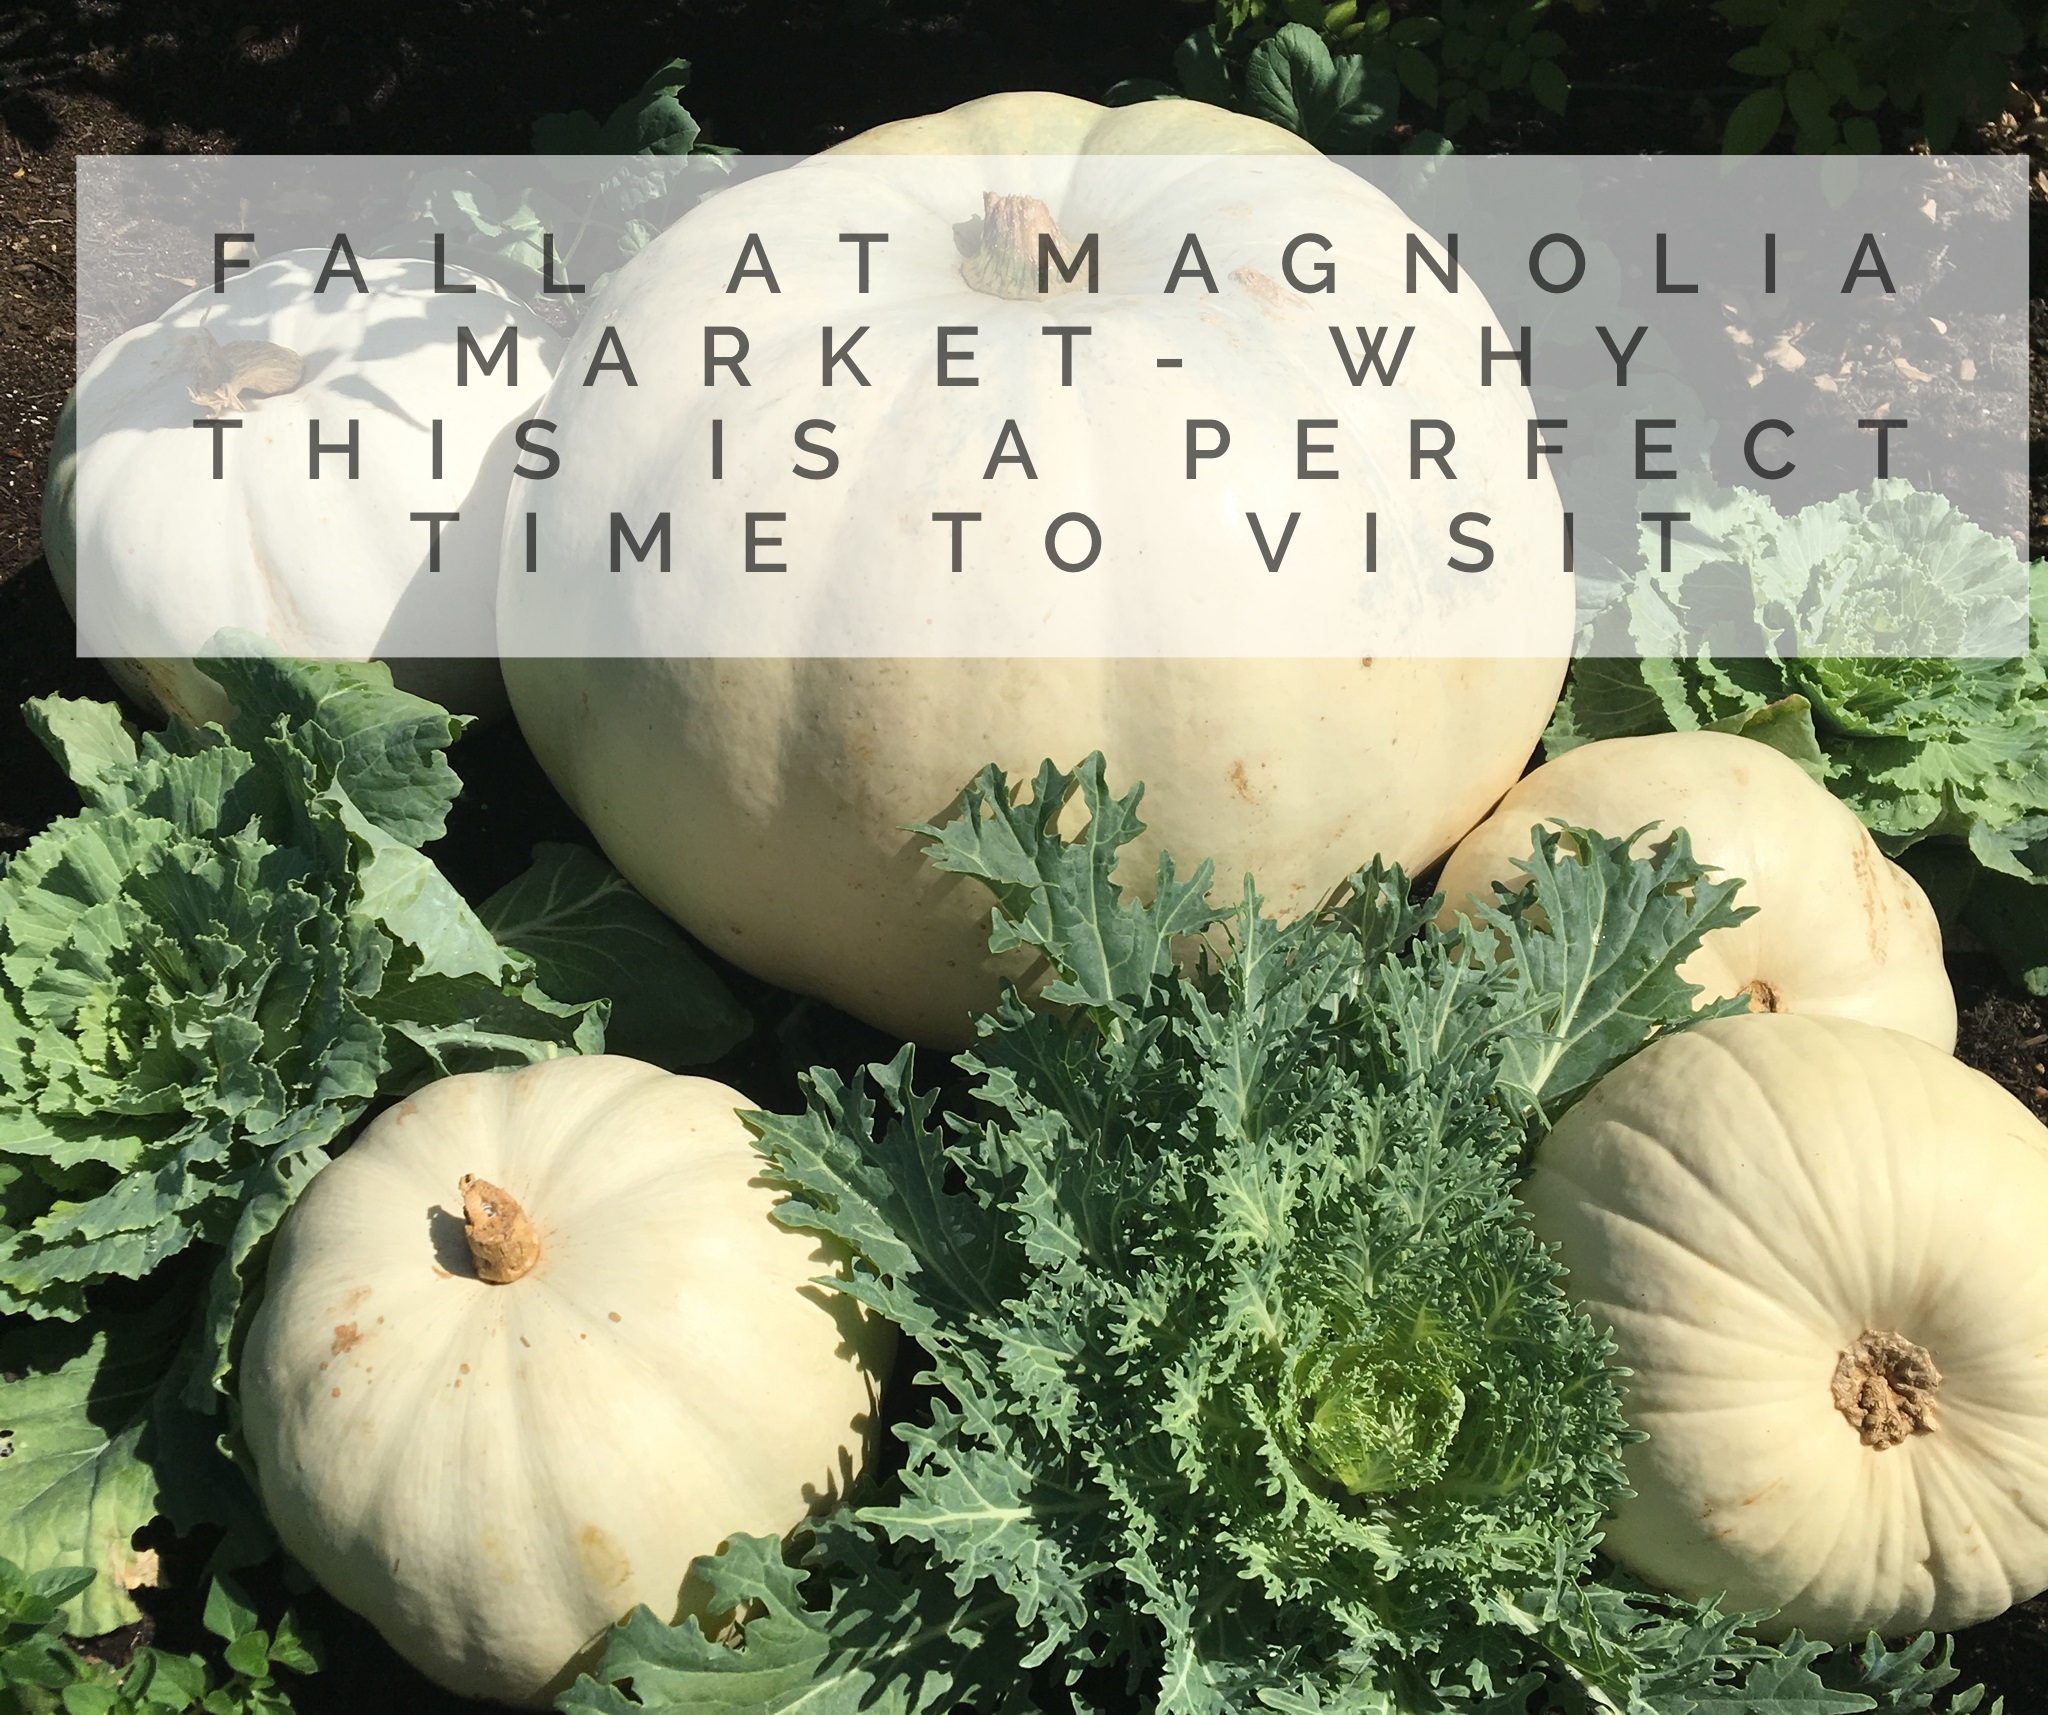 Fall At Magnolia Market- Why This Is A Perfect Time To Visit